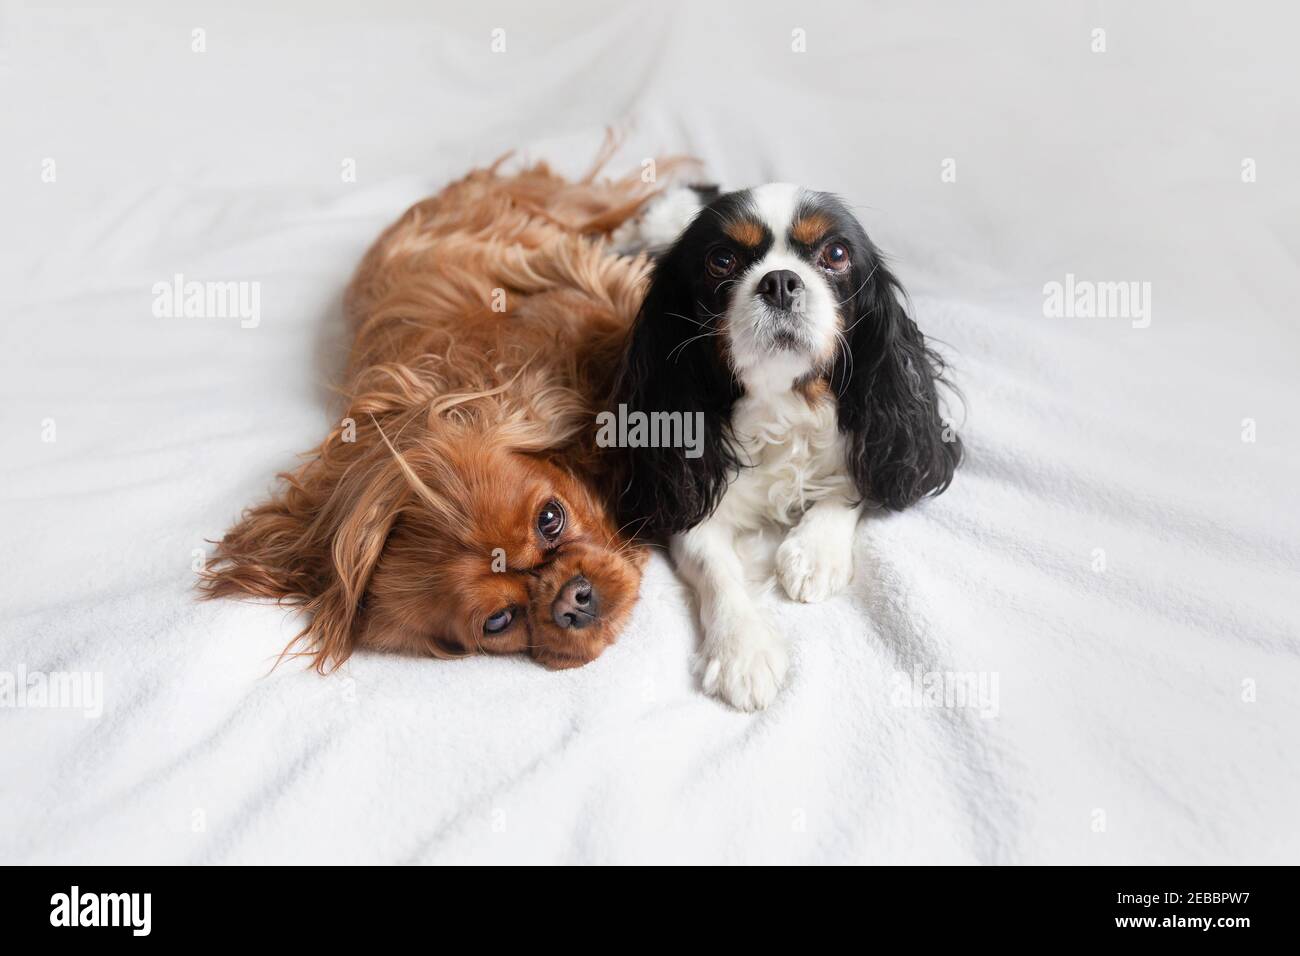 Cute dogs, cavalier spaniels relaxing together on bed Stock Photo